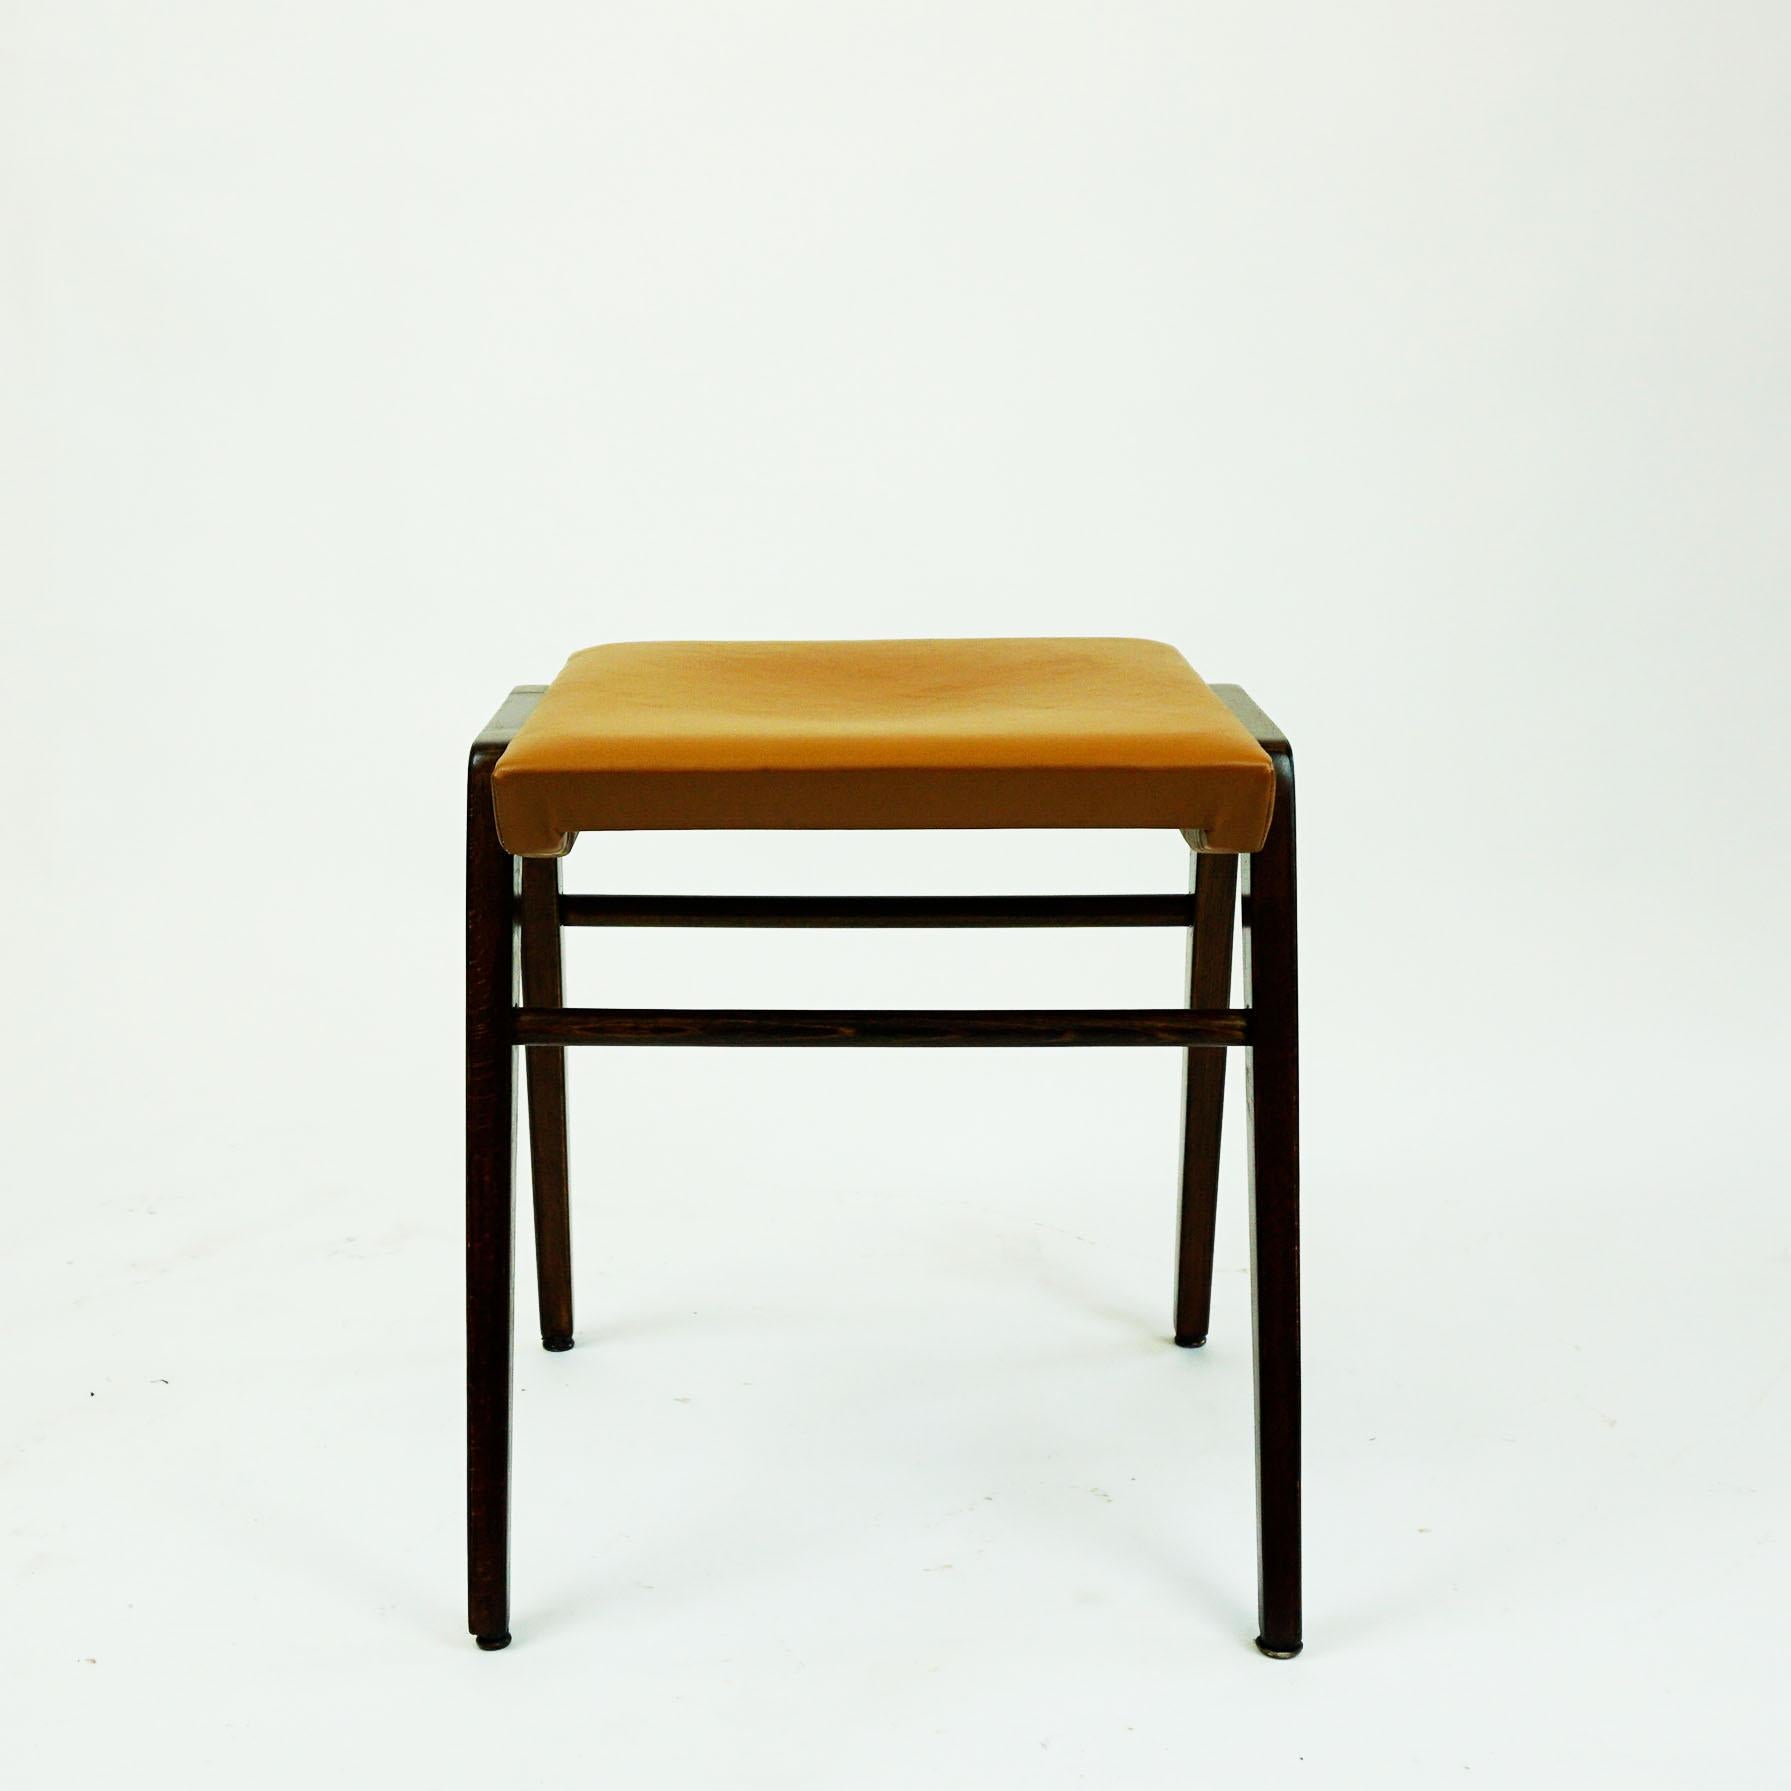 Authentic Austrian midcentury vintage beechwood and leather stool designed by Franz Schuster 1952 and produced by Wiesner Hager.. It has a beechwood frame and the seat is covered with renewed cognac brown Leather. which is in excellent restored